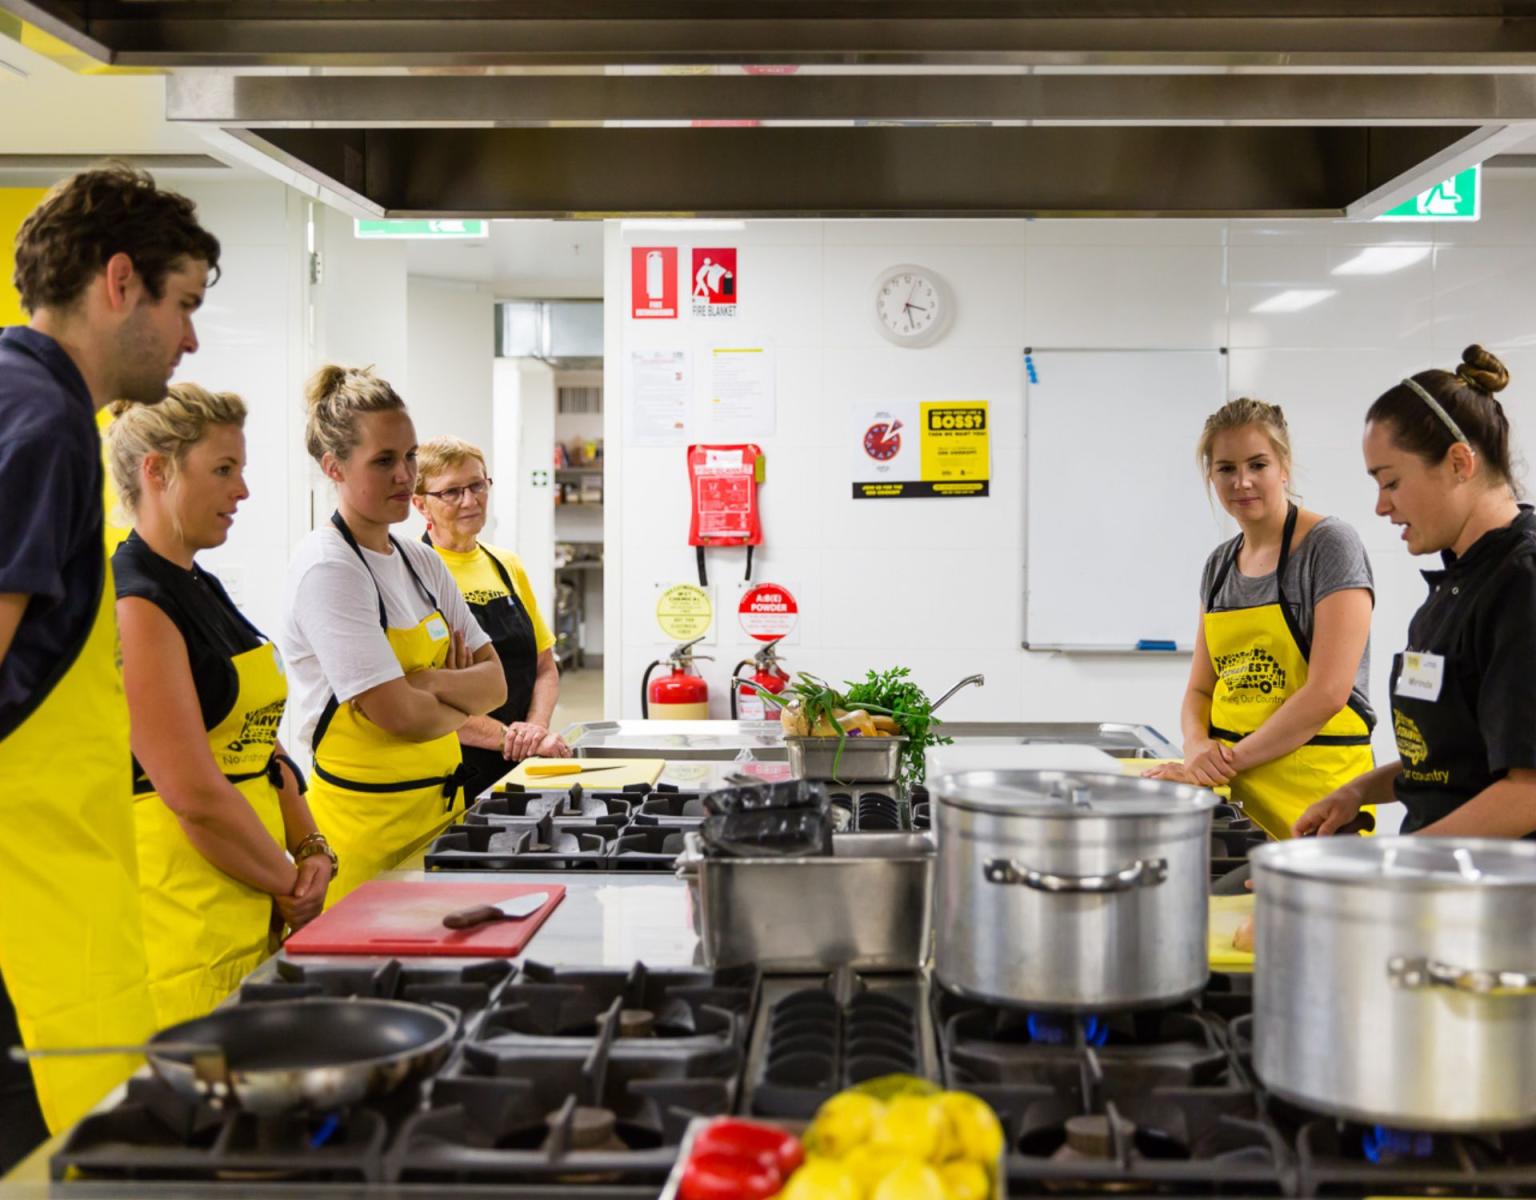 OzHarvest cooking class - A group of people gather around a kitchen bench and stove, listening to a chef gives directions on preparing the food. 